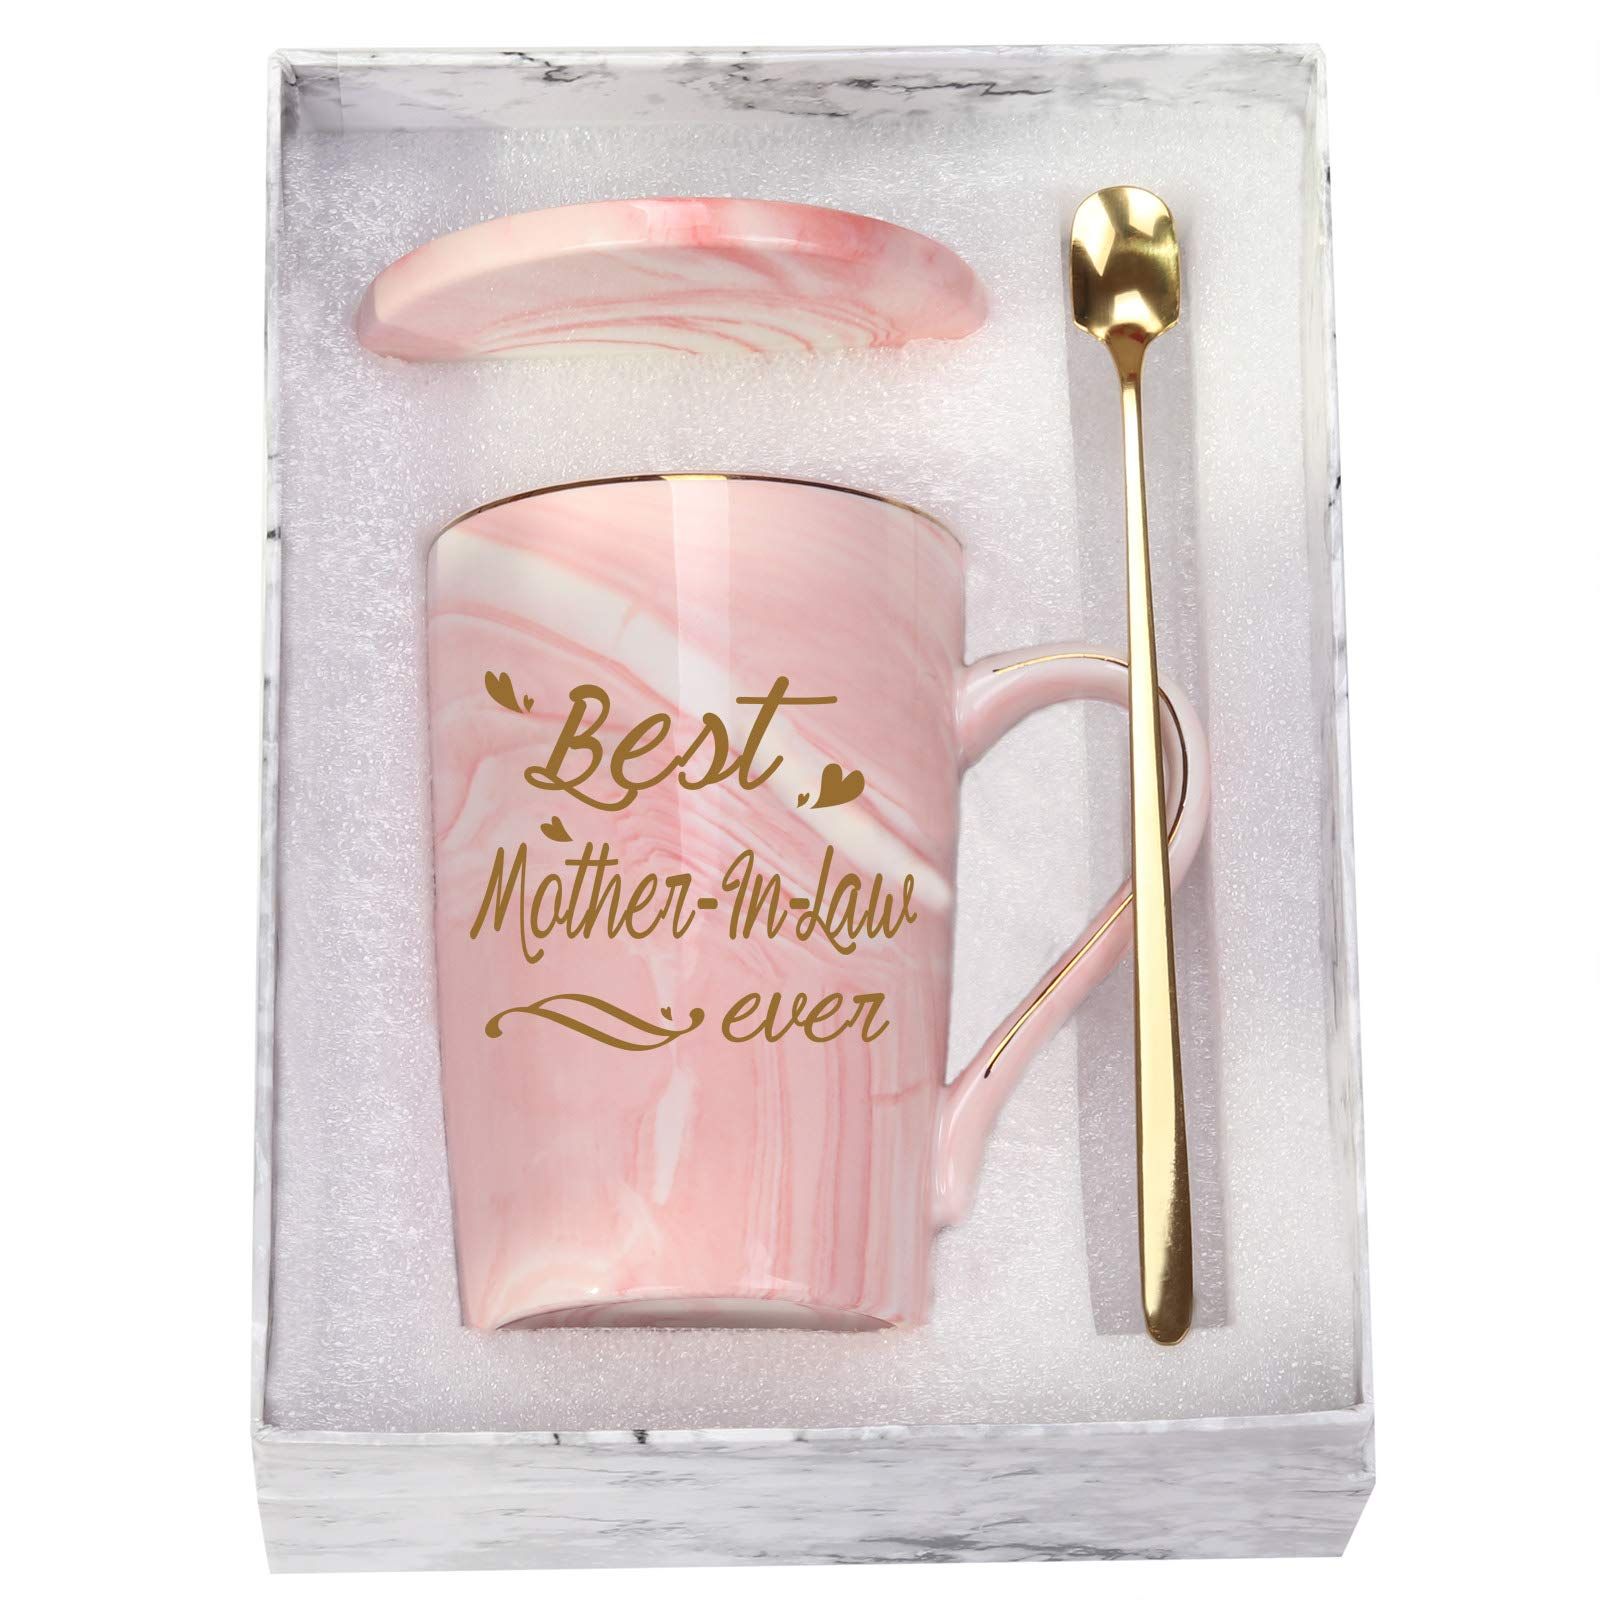 12 Gift Ideas For Your Mother-In-Law: #GiftGuide Mother's Day Special  Edition | WeddingBazaar